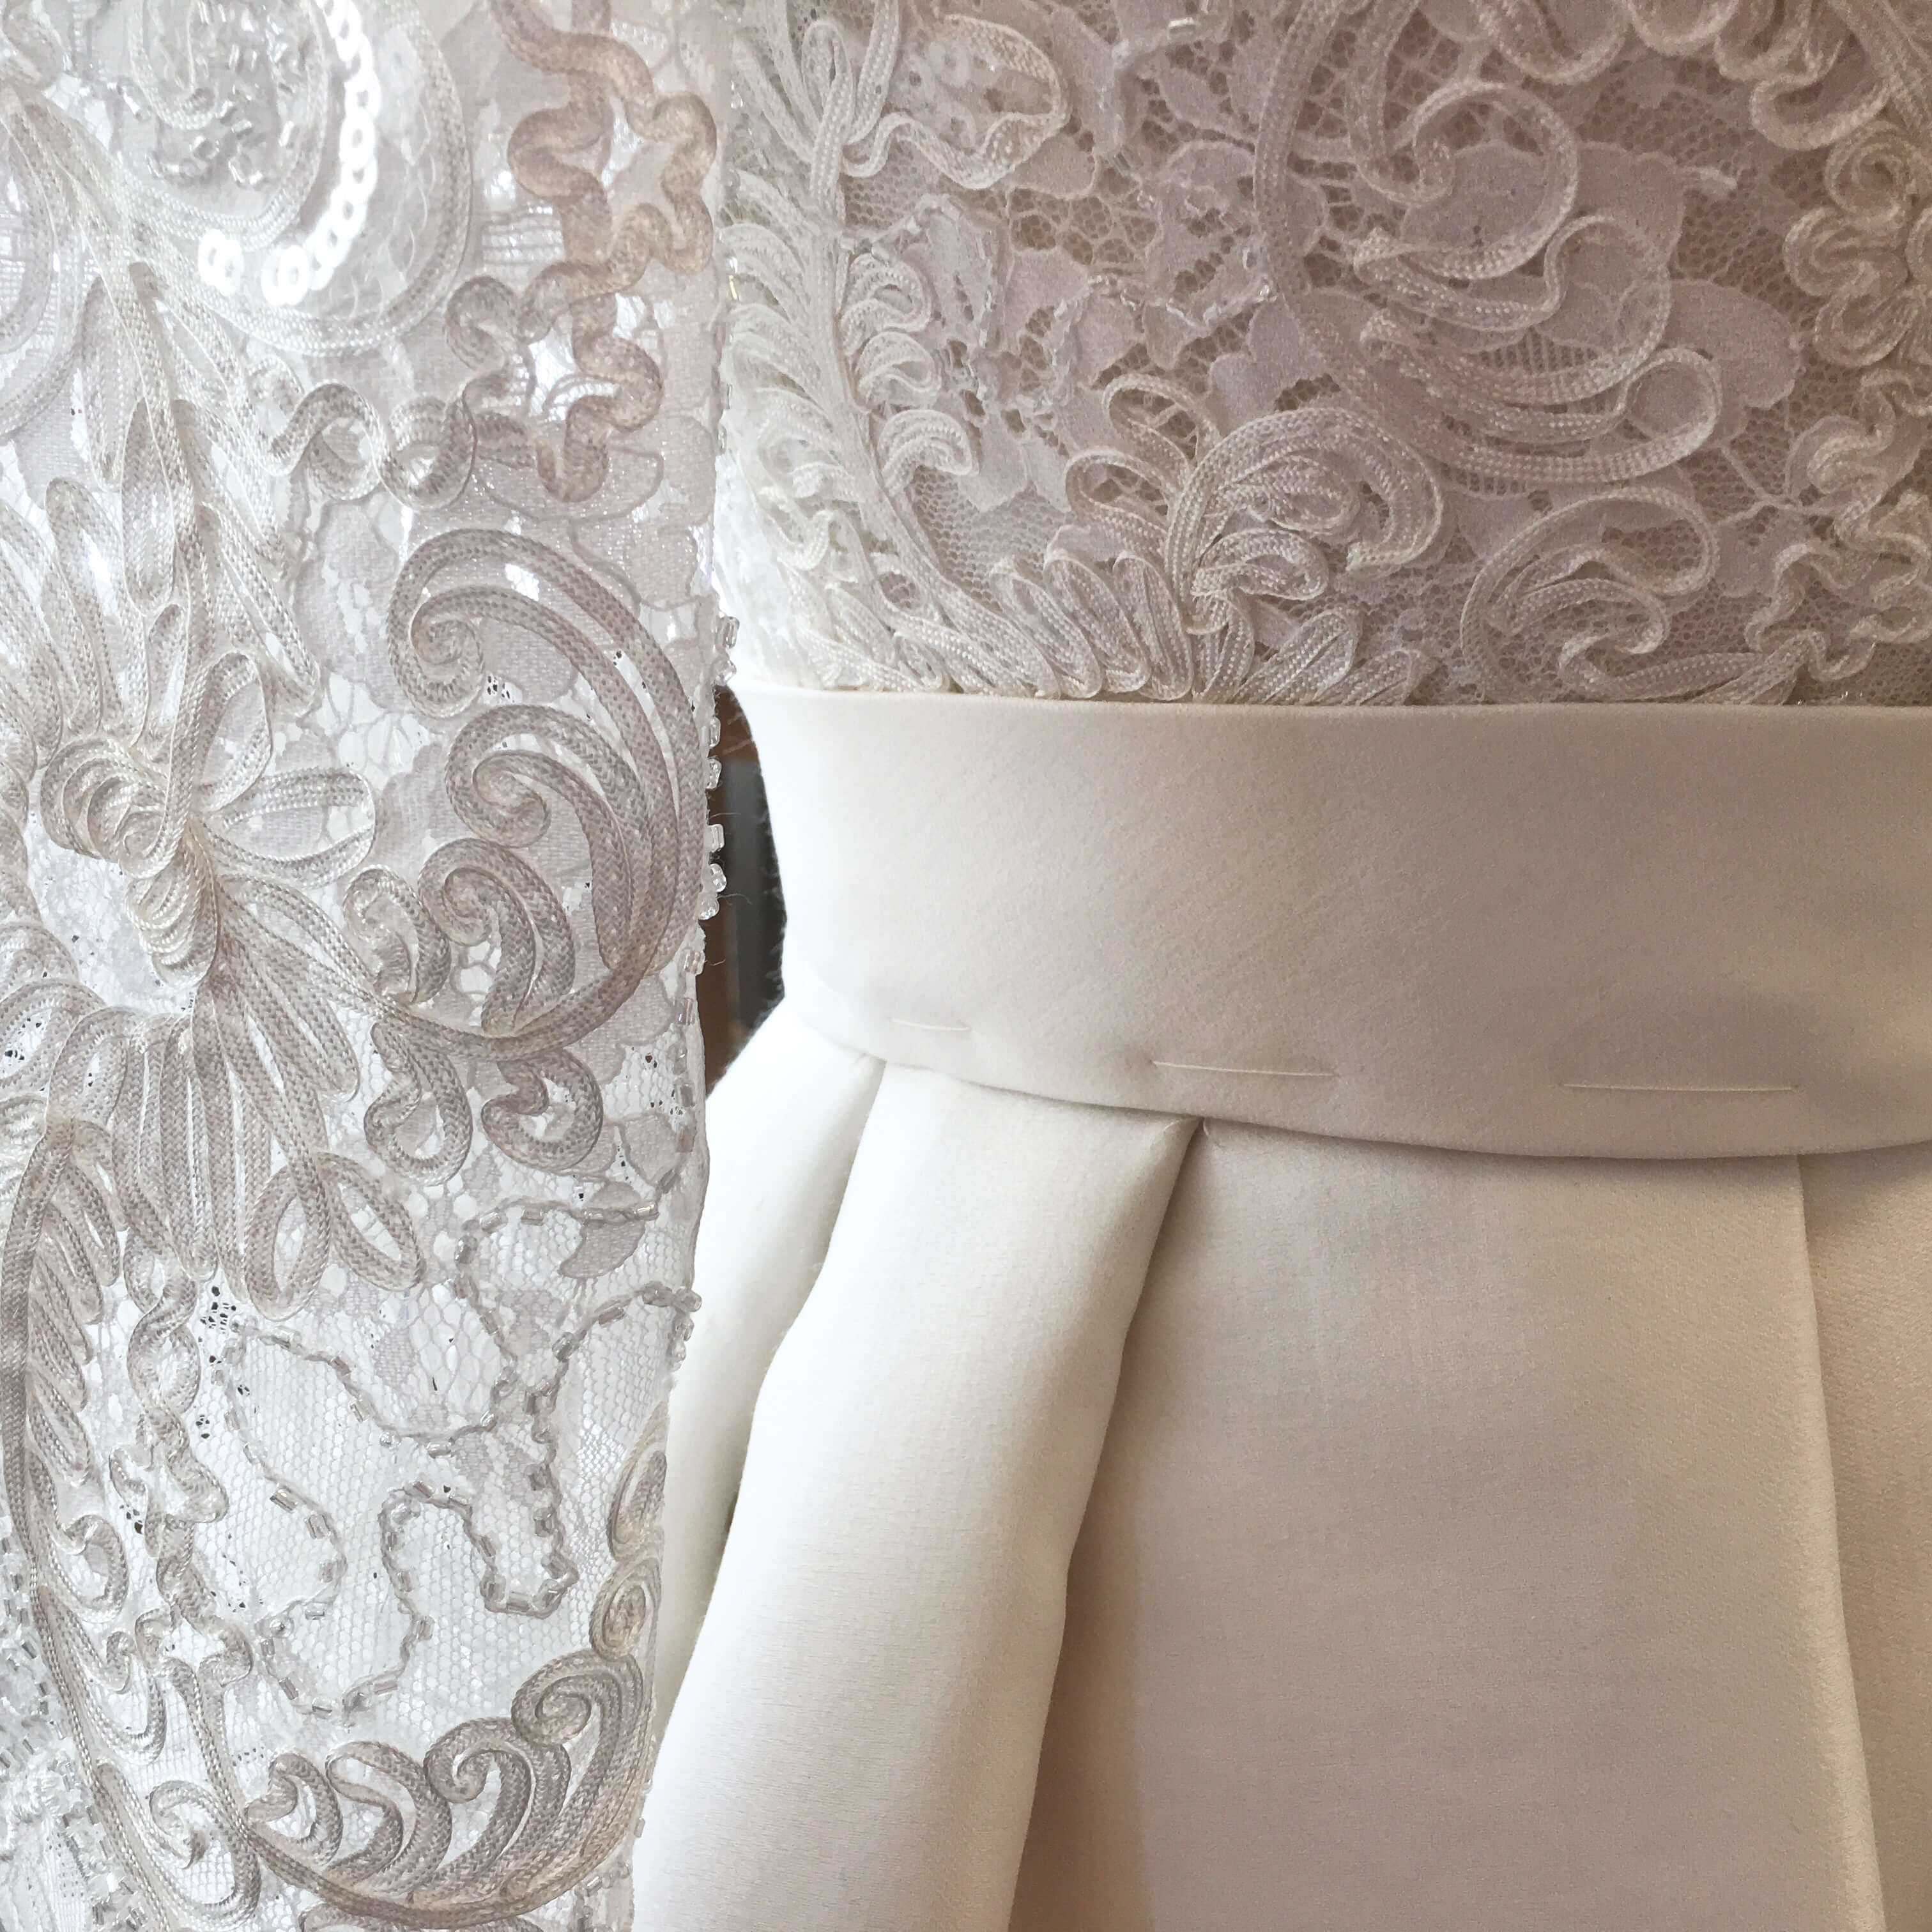 Deborah's Lace Top and Final Fitting by Brooks Ann Camper Bridal Couture